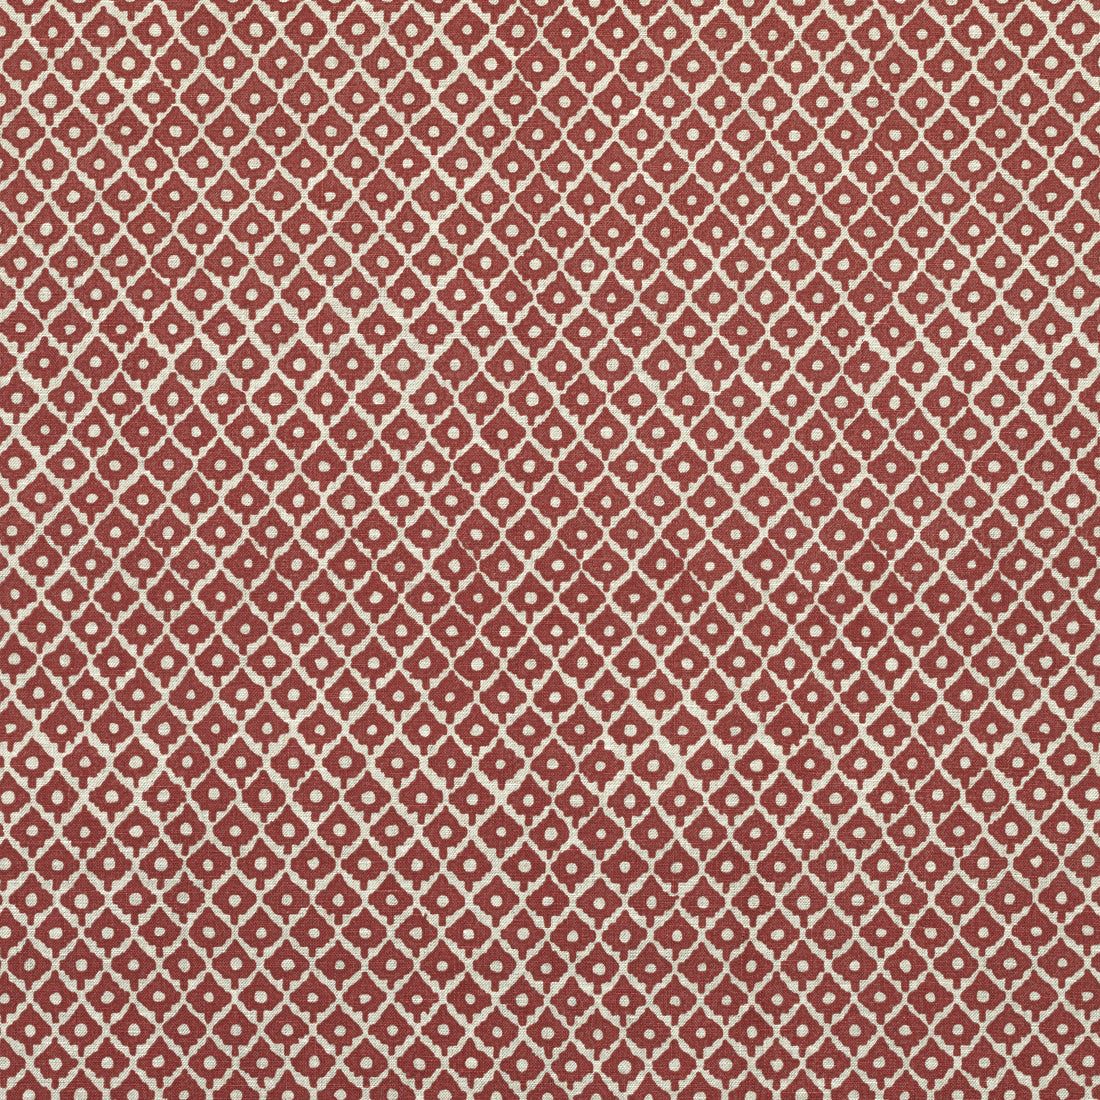 Petit Arbre fabric in raspberry on flax  color - pattern number AF9634 - by Anna French in the Savoy collection